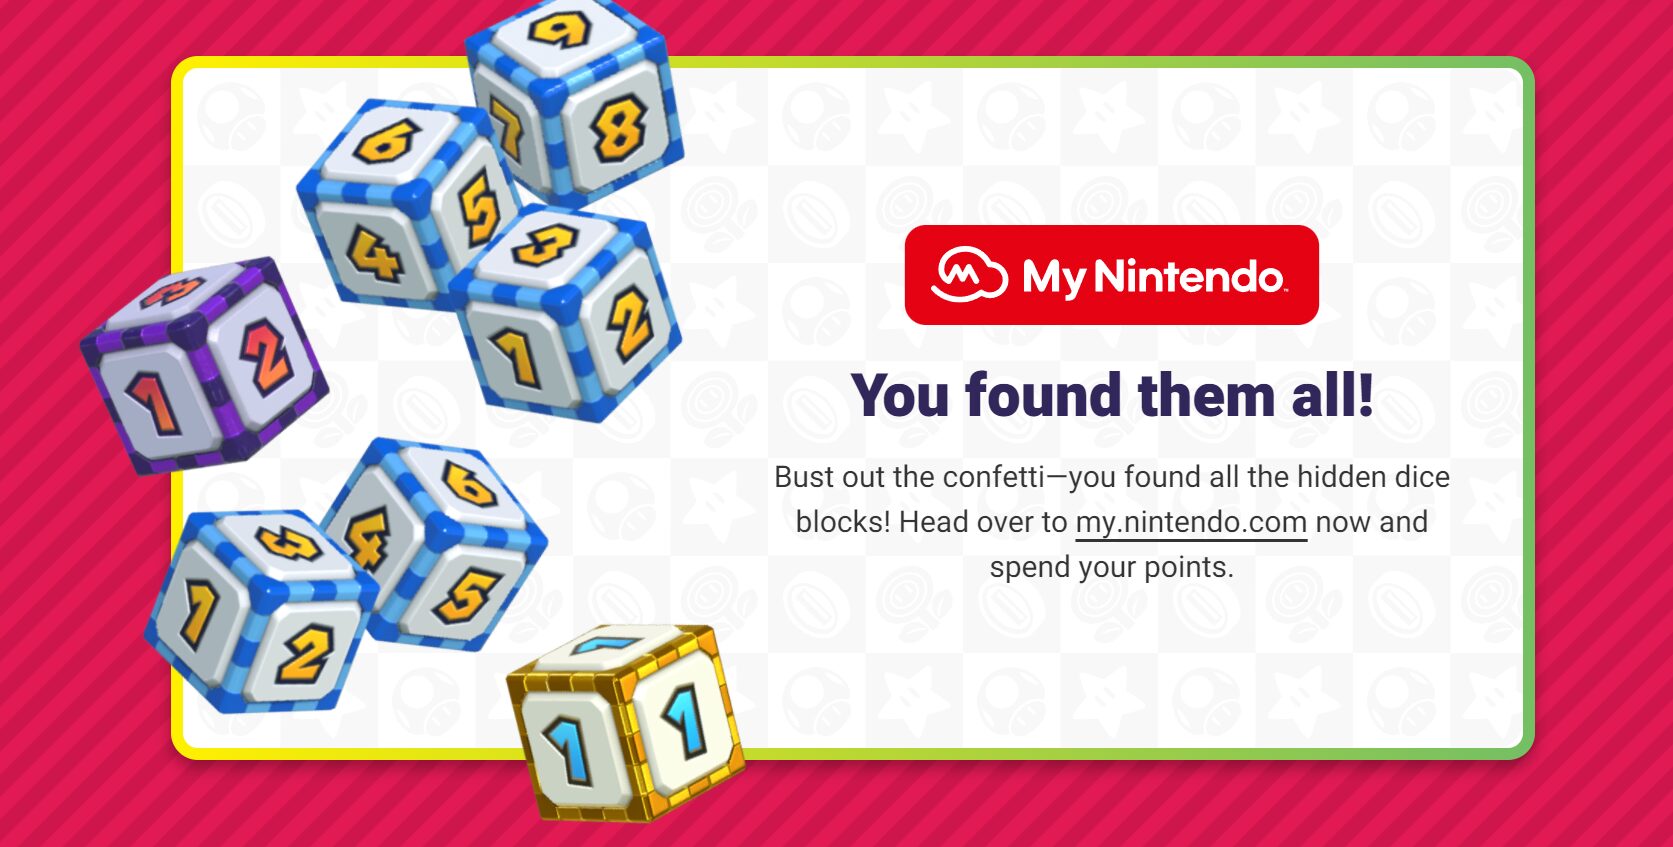 Currently restocked MyNintendo coins are different than the